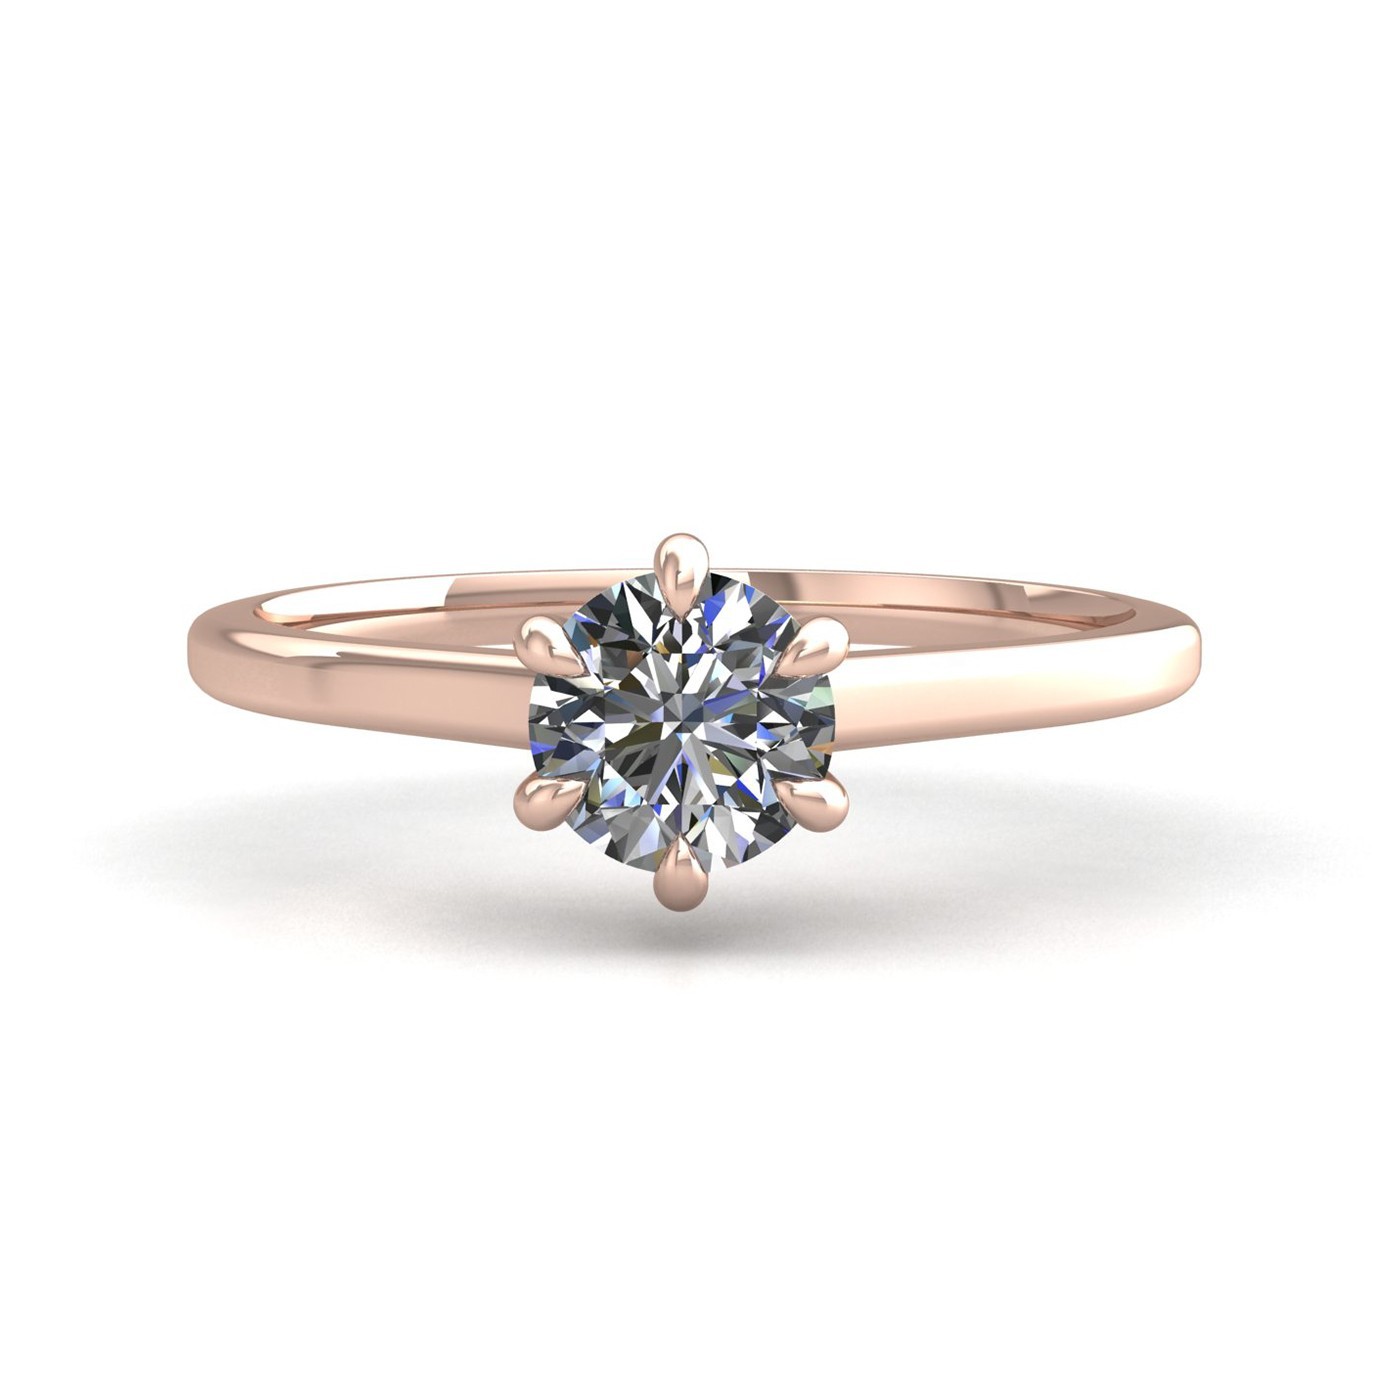 18k rose gold 1,20 ct 6 prongs solitaire round cut diamond engagement ring with whisper thin band Photos & images